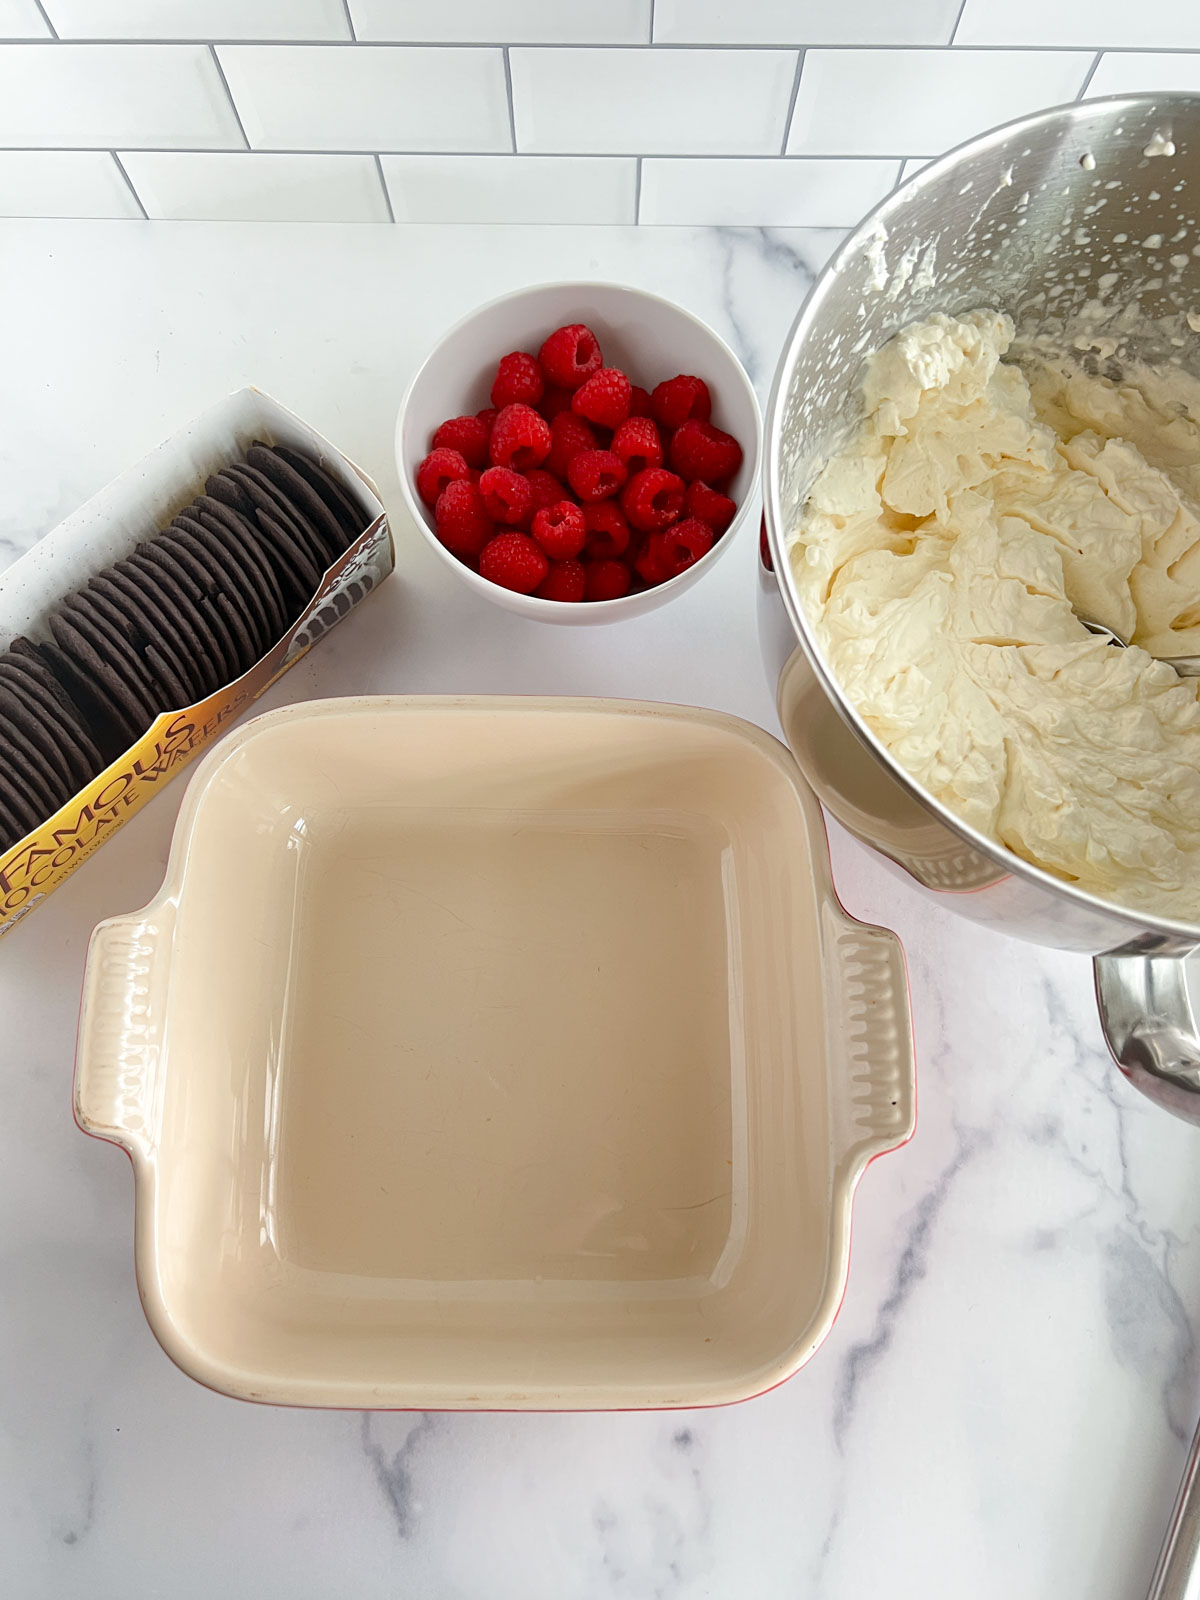 Chocolate wafers in a box, raspberries in a bowl, whipped cream in a bowl, 8 inch by 8 inch square pan